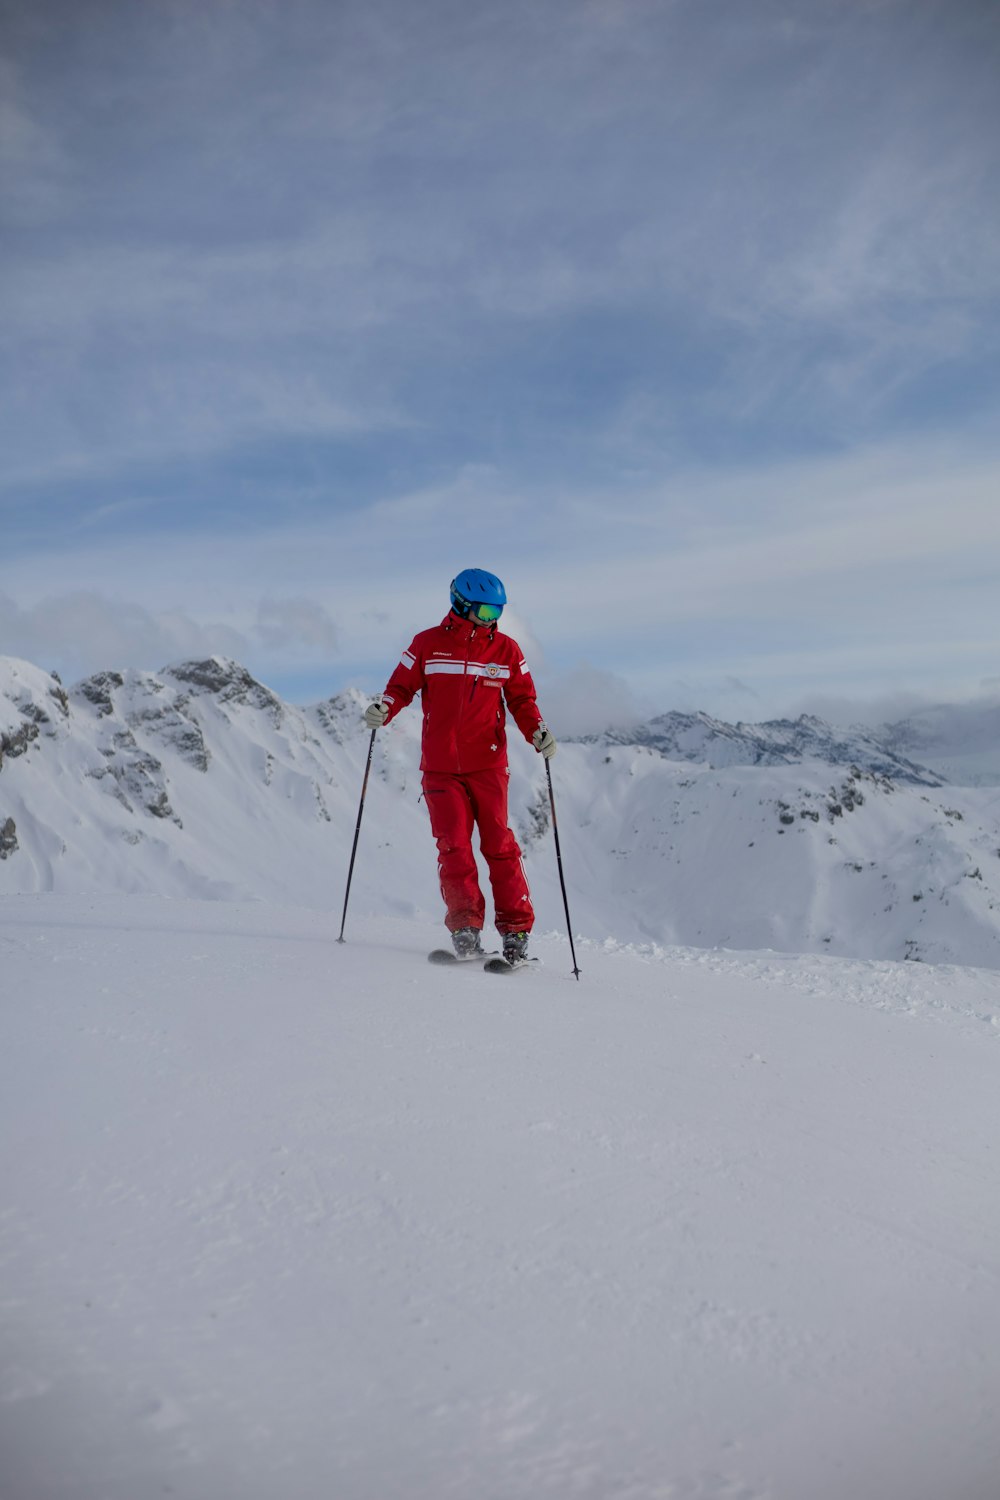 person in red jacket and black pants riding ski blades on snow covered mountain during daytime